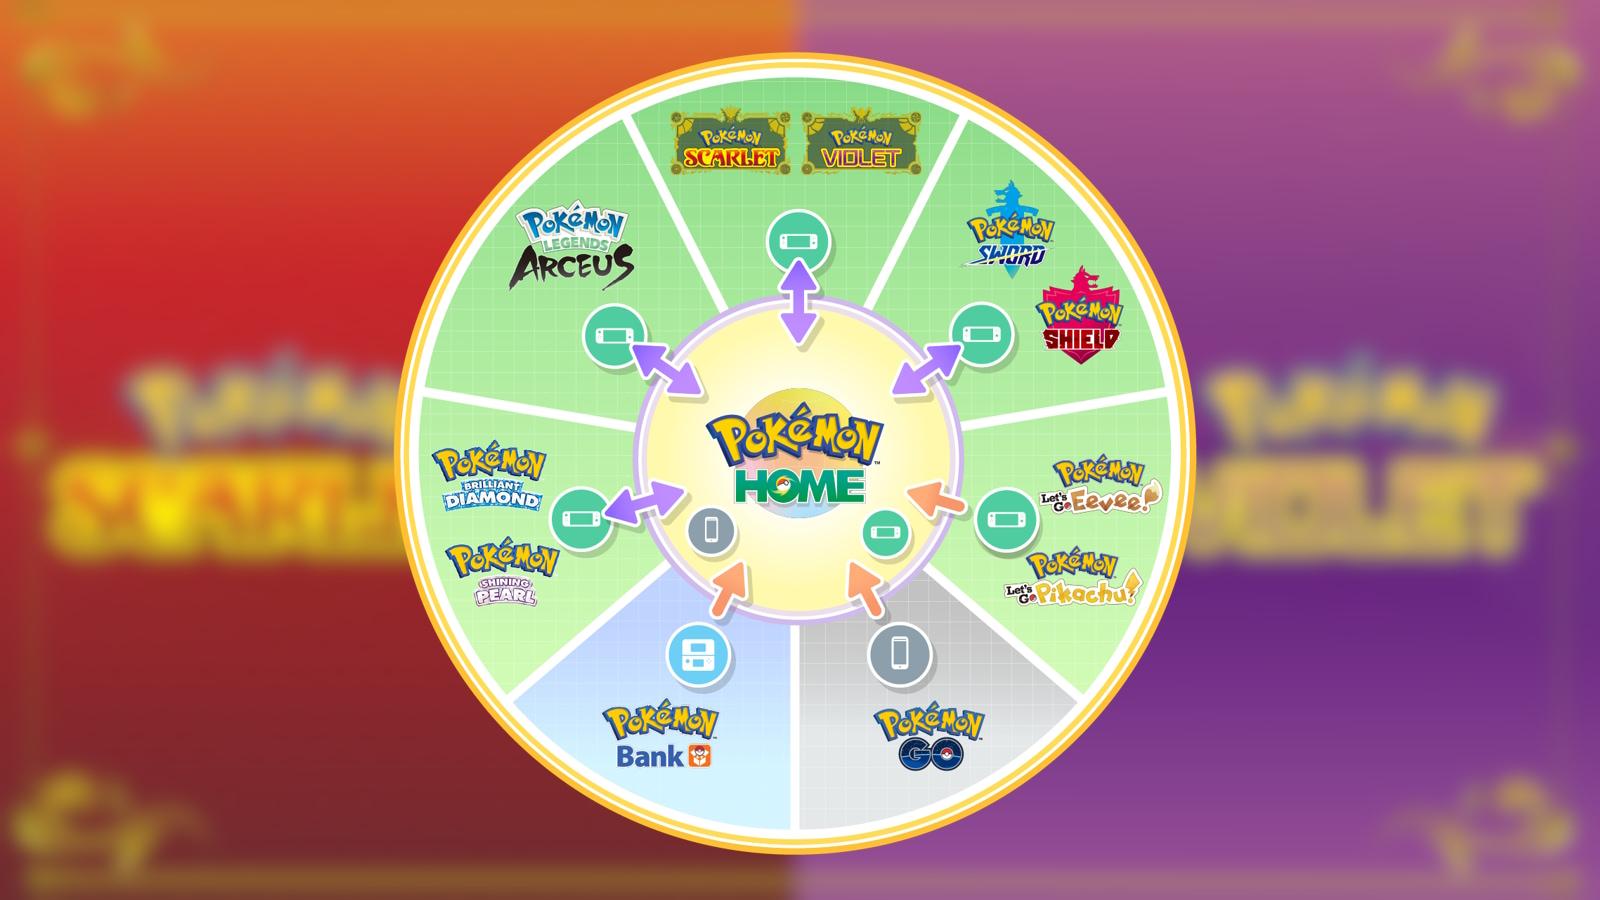 graph showing which games pokemon home will support after may 24 update adding scarlet and violet.